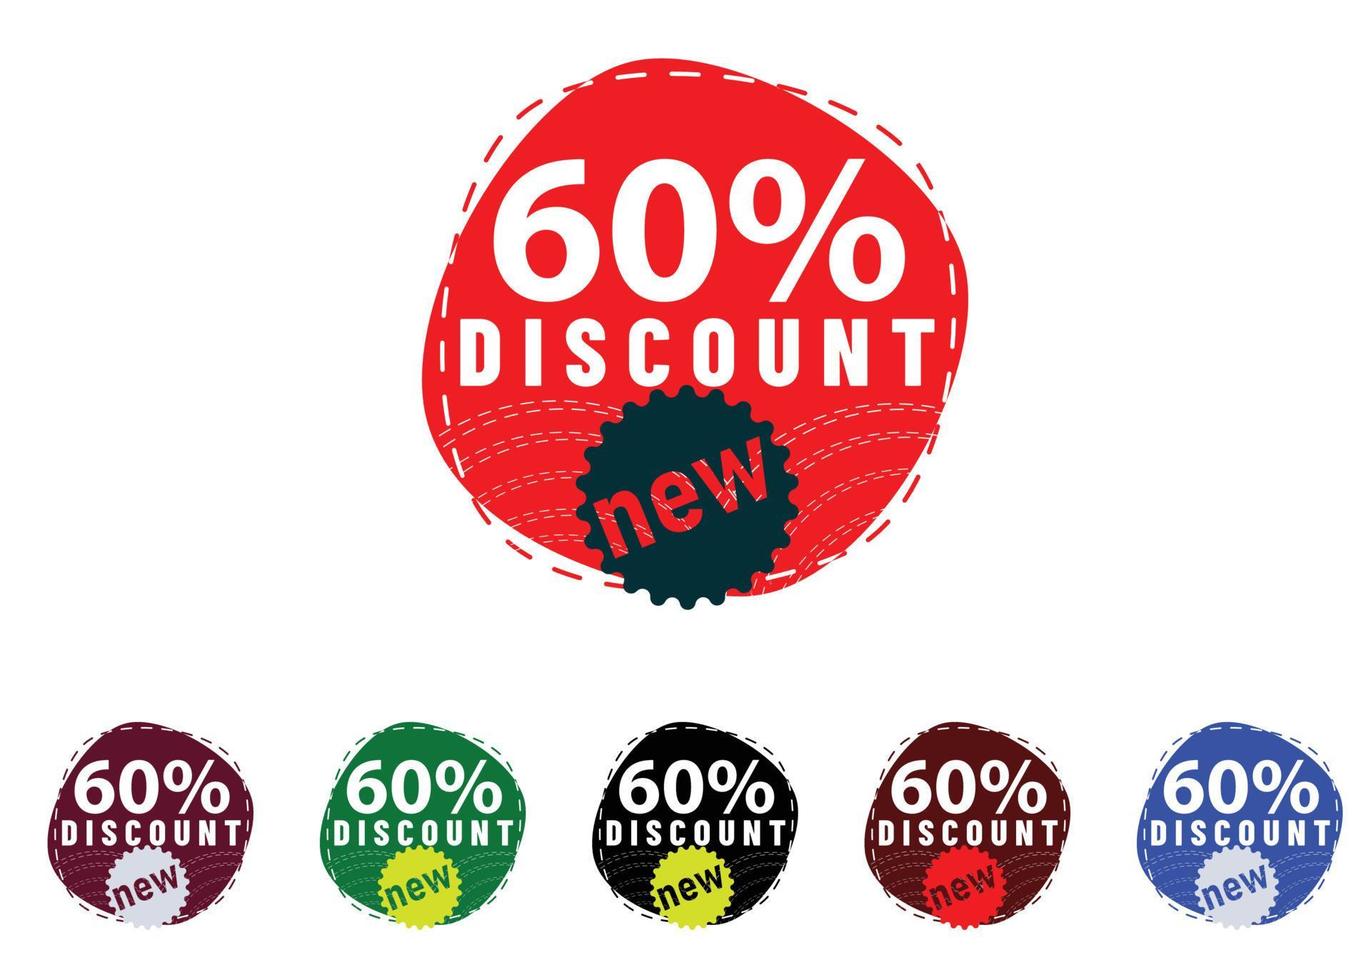 60 percent discount new offer logo and icon design vector